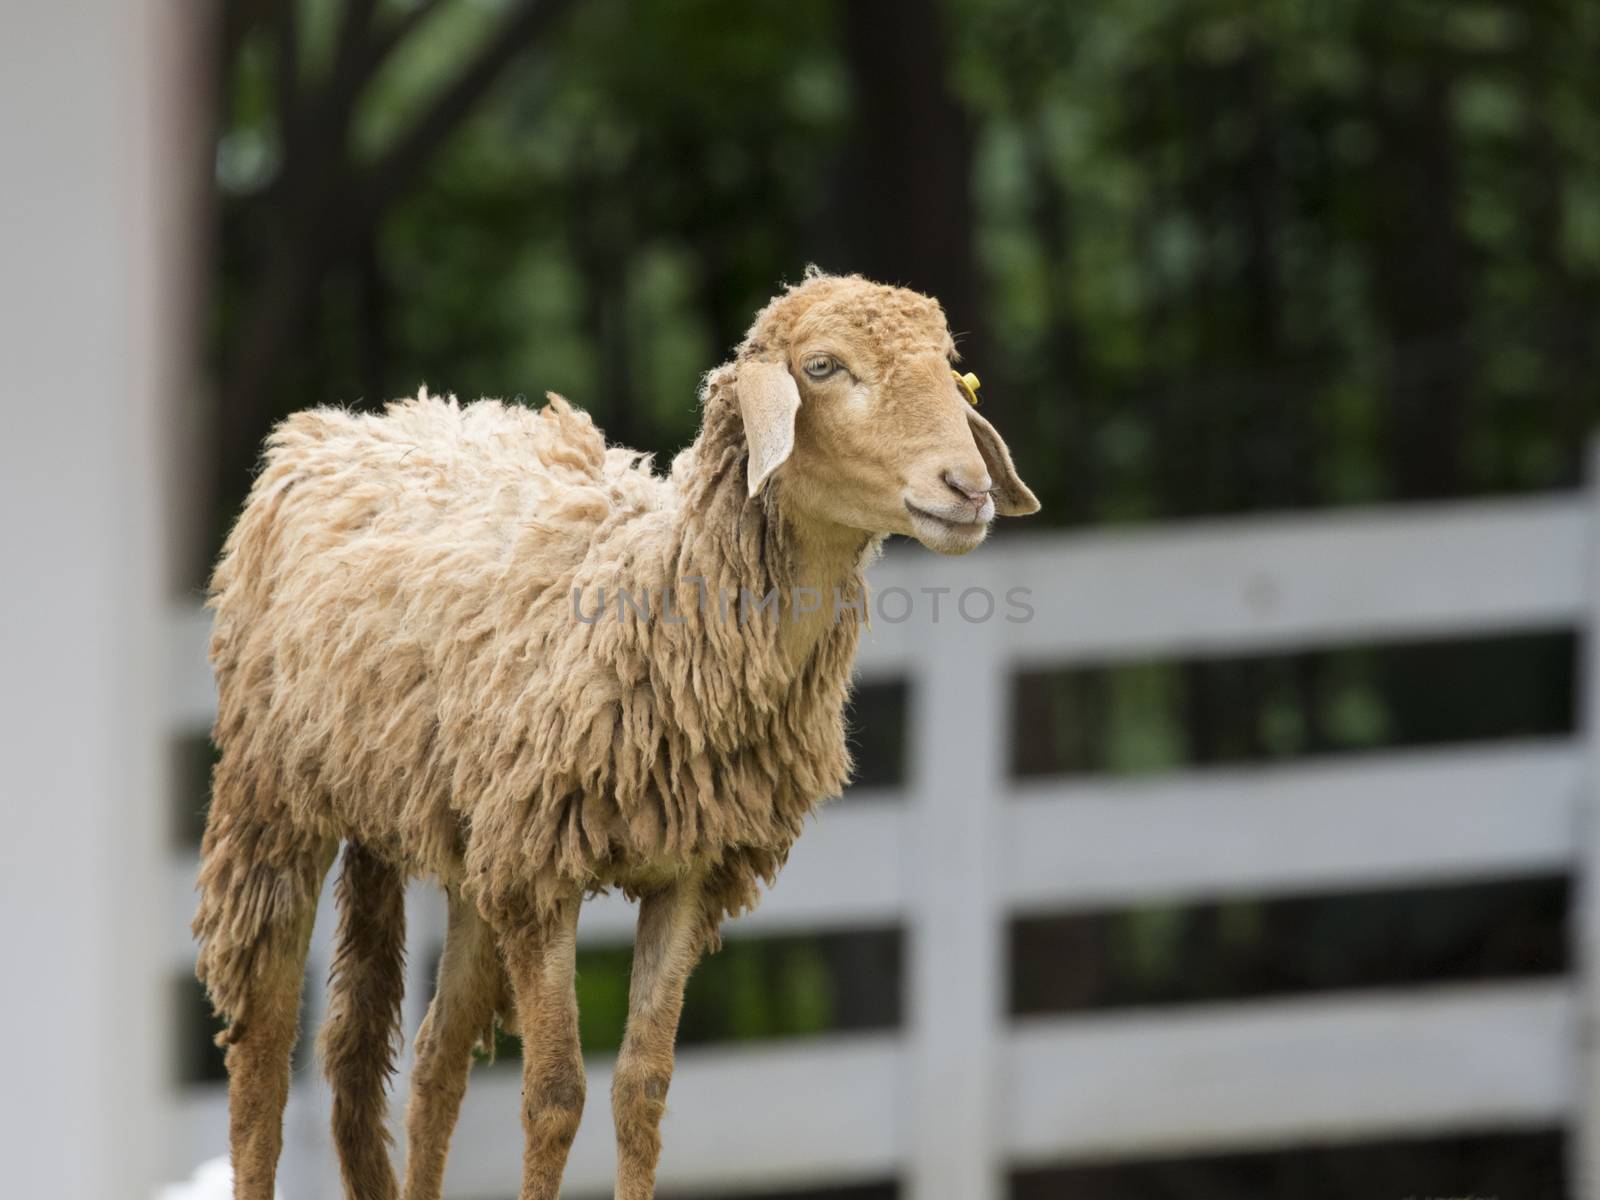 Image of a brown sheep in farm in thailand.